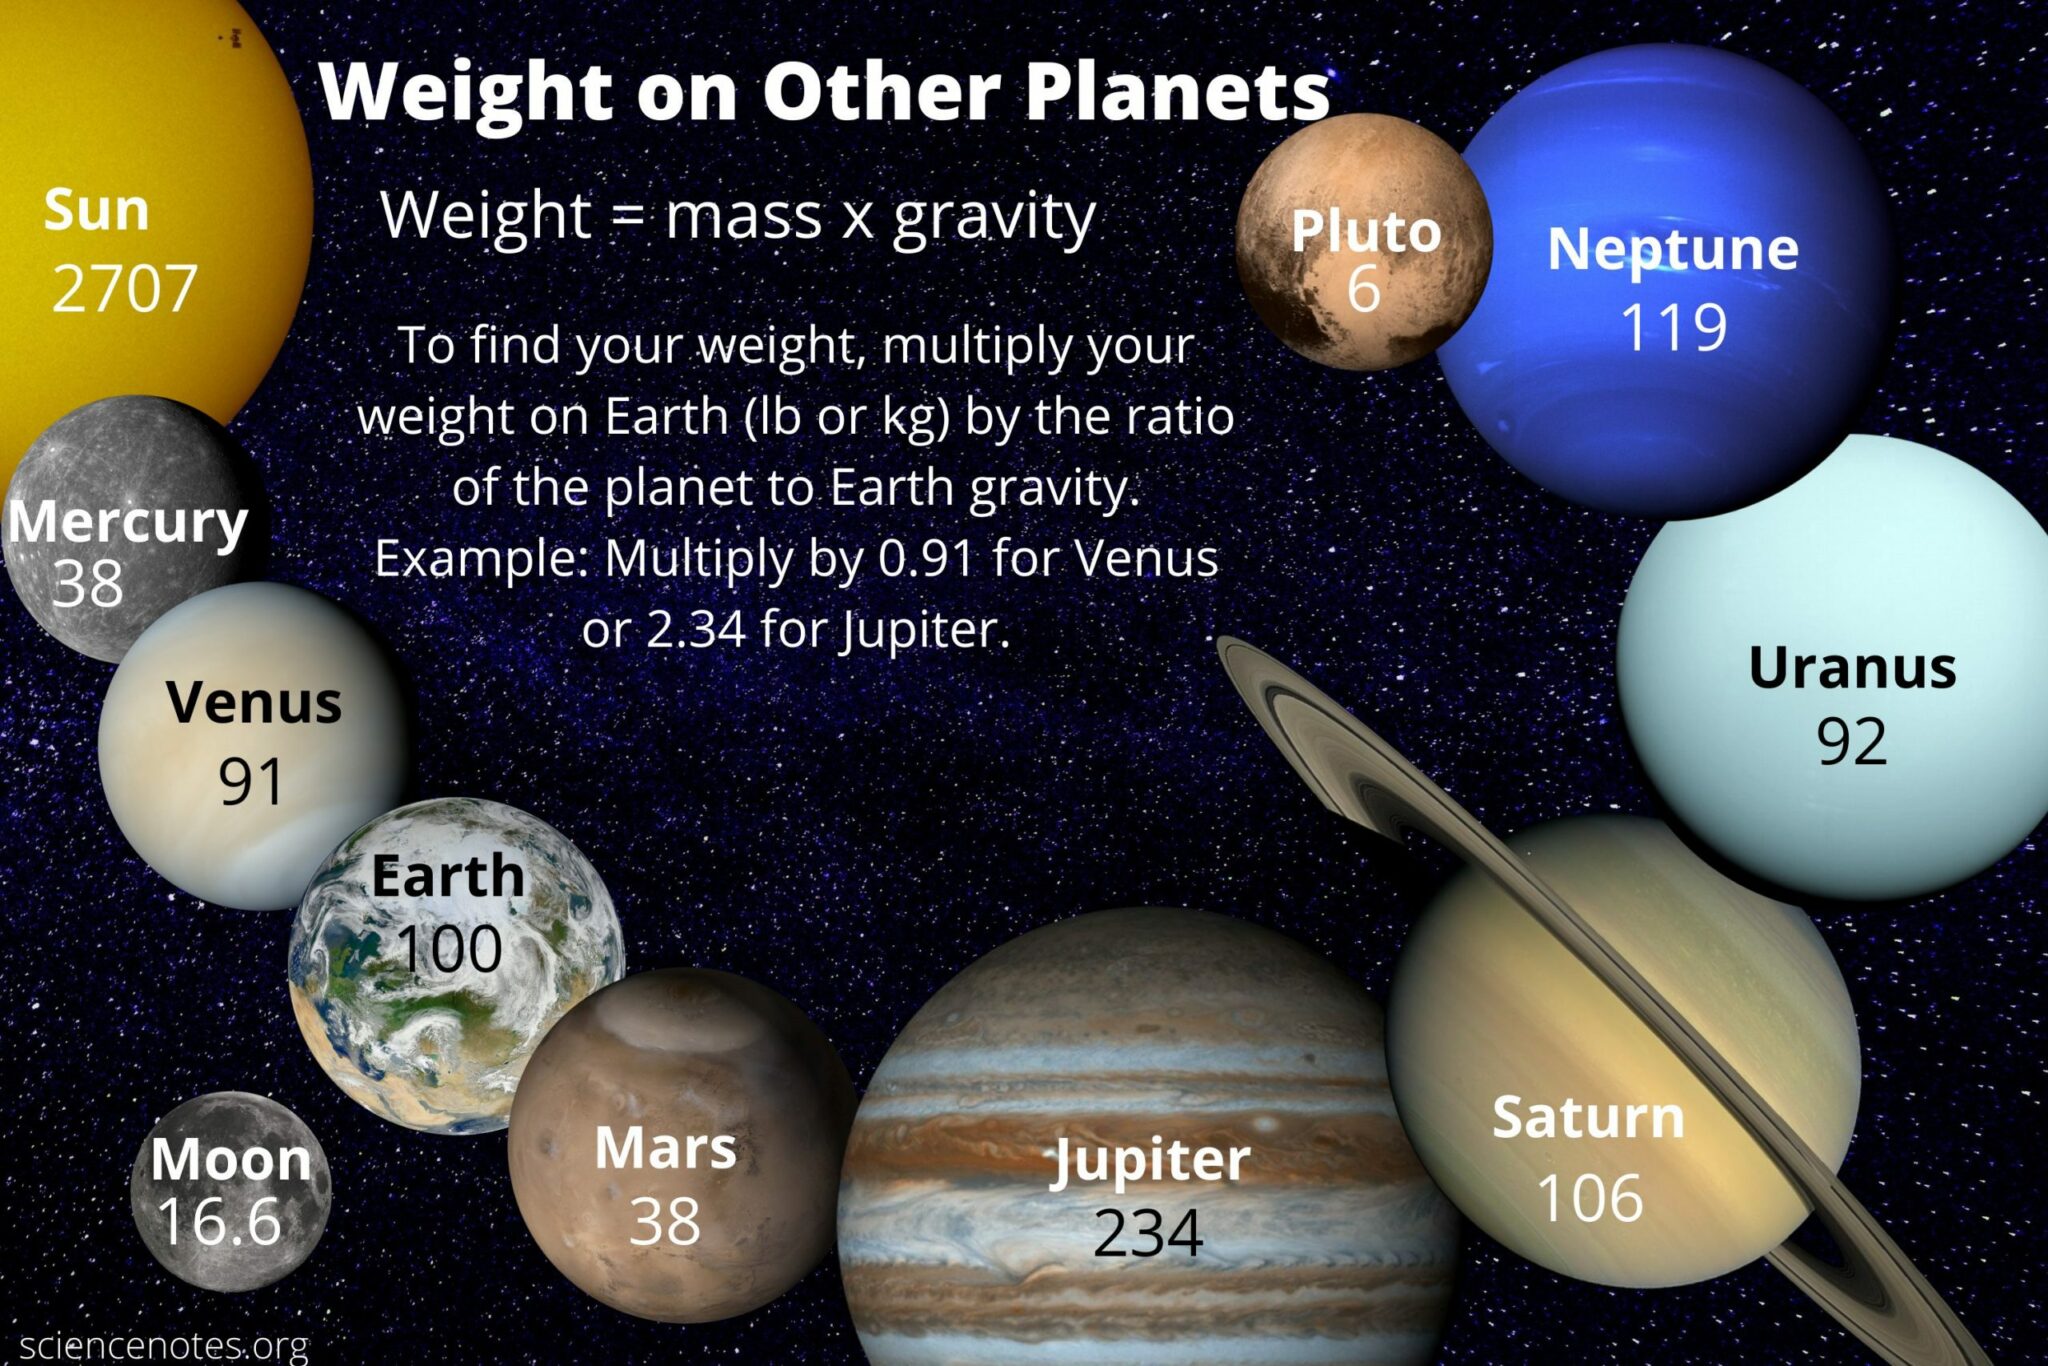 what is jupiter like and how big is the planet jupiter compared to the other planets in the universe